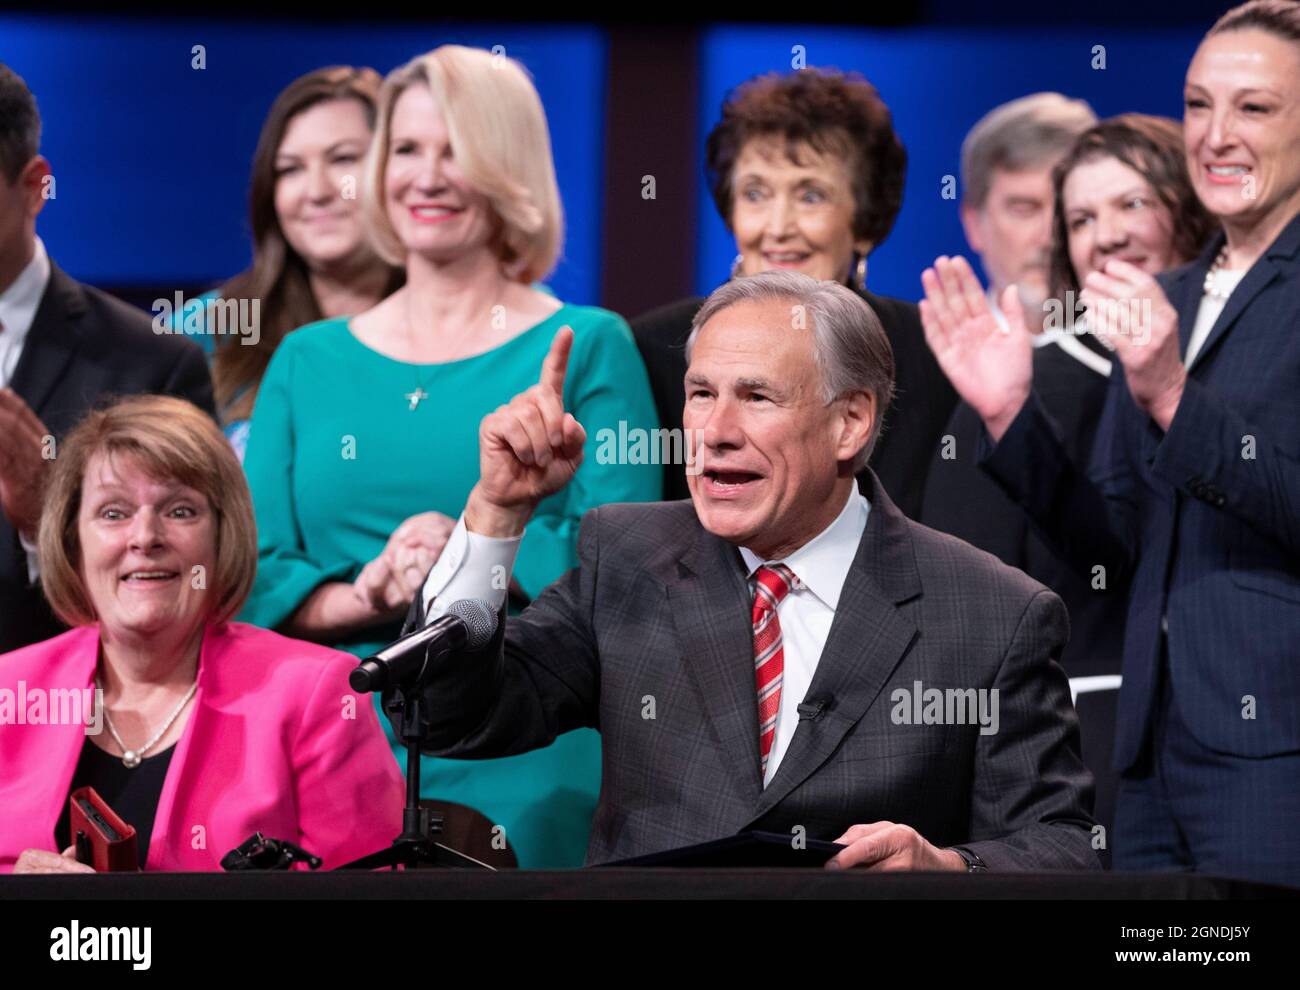 Austin, Texas, USA. 24th Sep, 2021. Calling it 'the icing on the cake', Texas Gov. GREG ABBOTT poses for pictures after signing a bill further restricting abortions in Texas. The bill outlaws mail-order abortion drugs in Texas. Abbott spoke at the Texas Faith, Family & Freedom Forum at an Austin church. Credit: Bob Daemmrich/Alamy Live News Credit: Bob Daemmrich/Alamy Live News Stock Photo